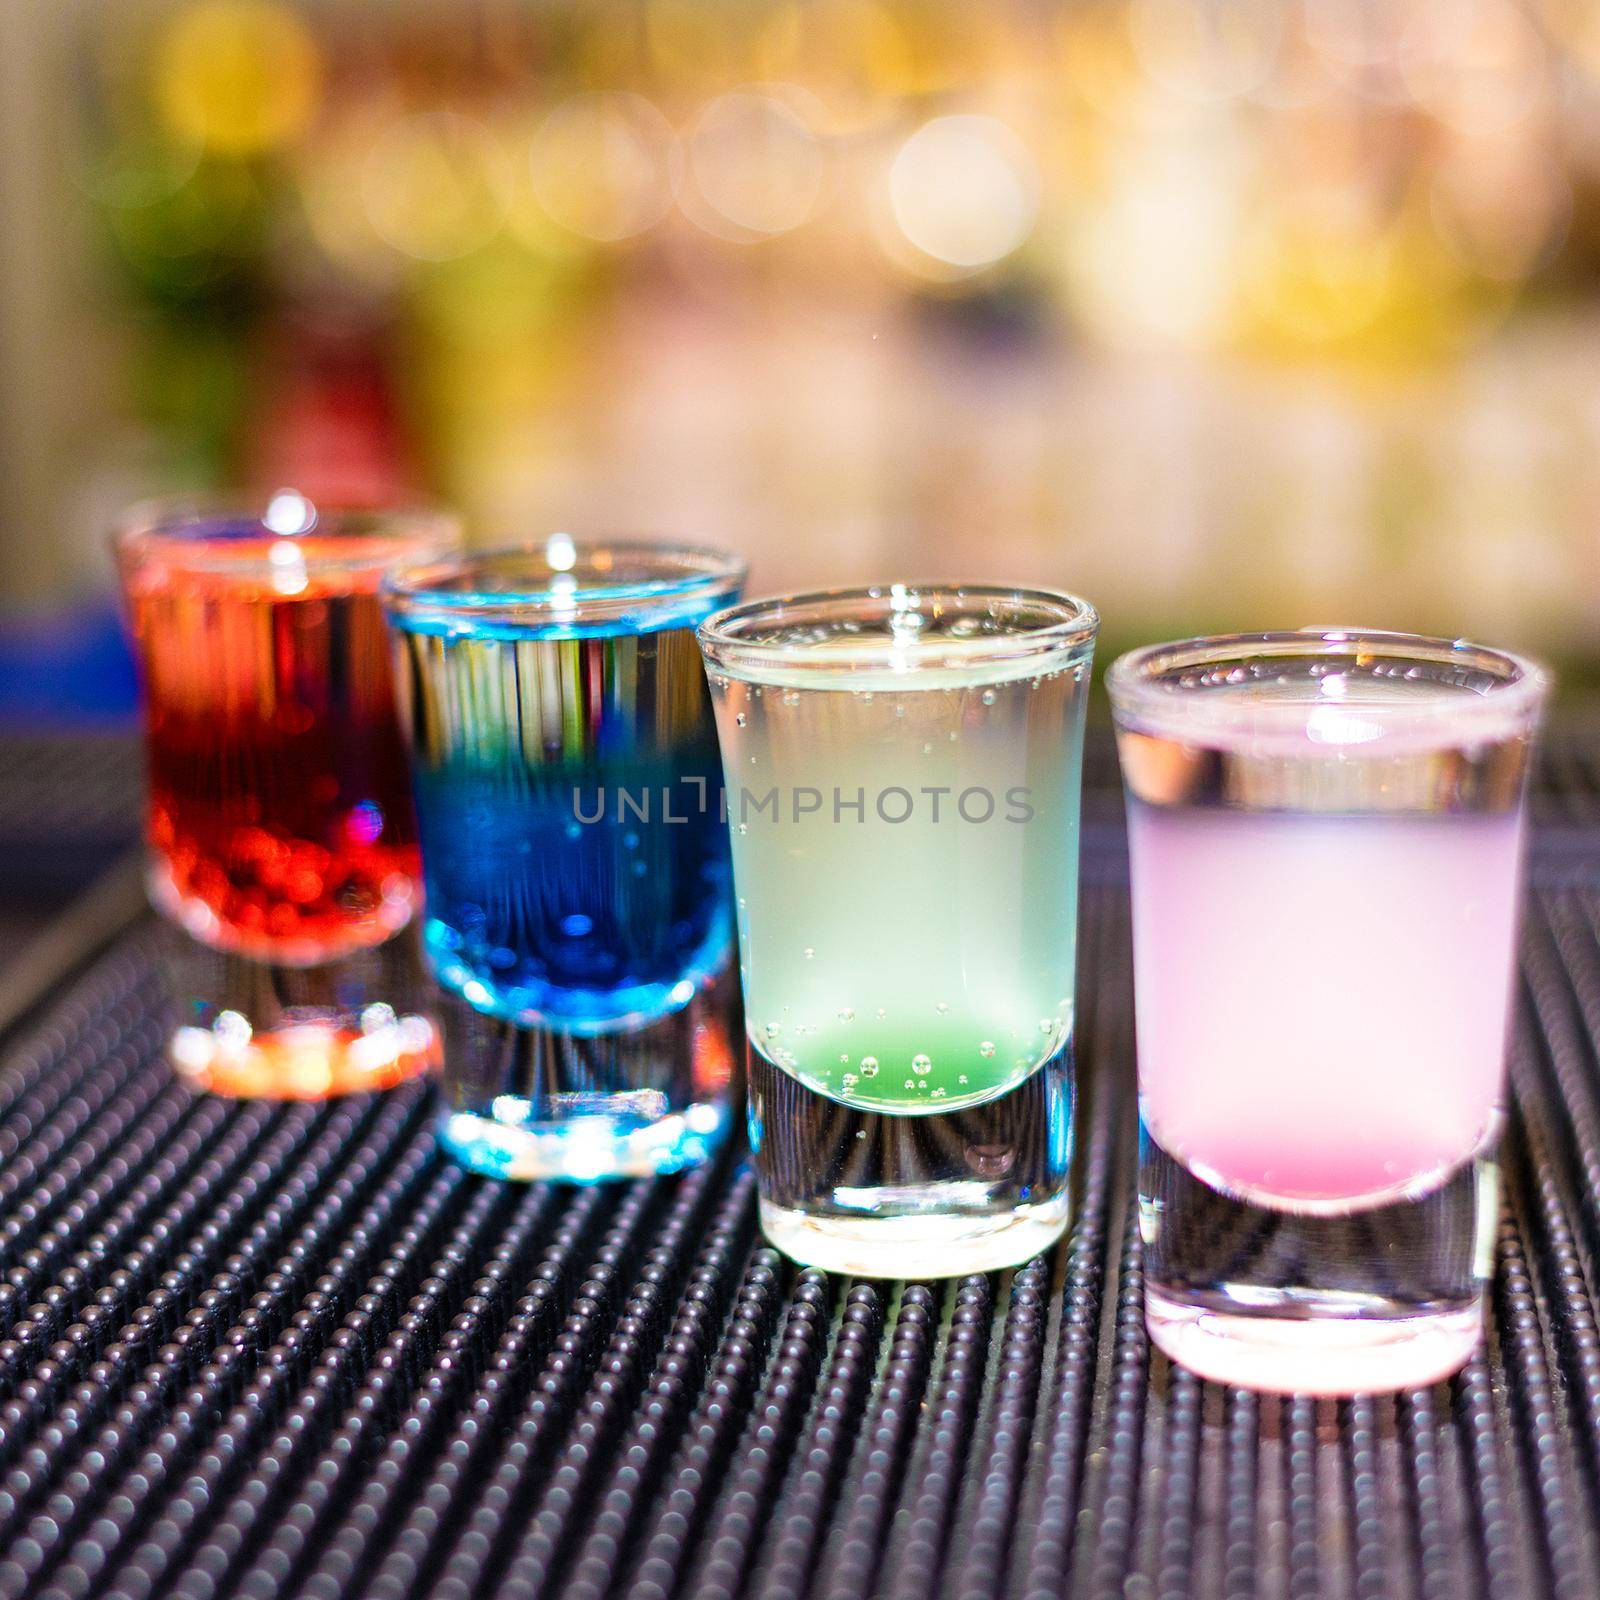 Colorful alcohol cocktails with blur background